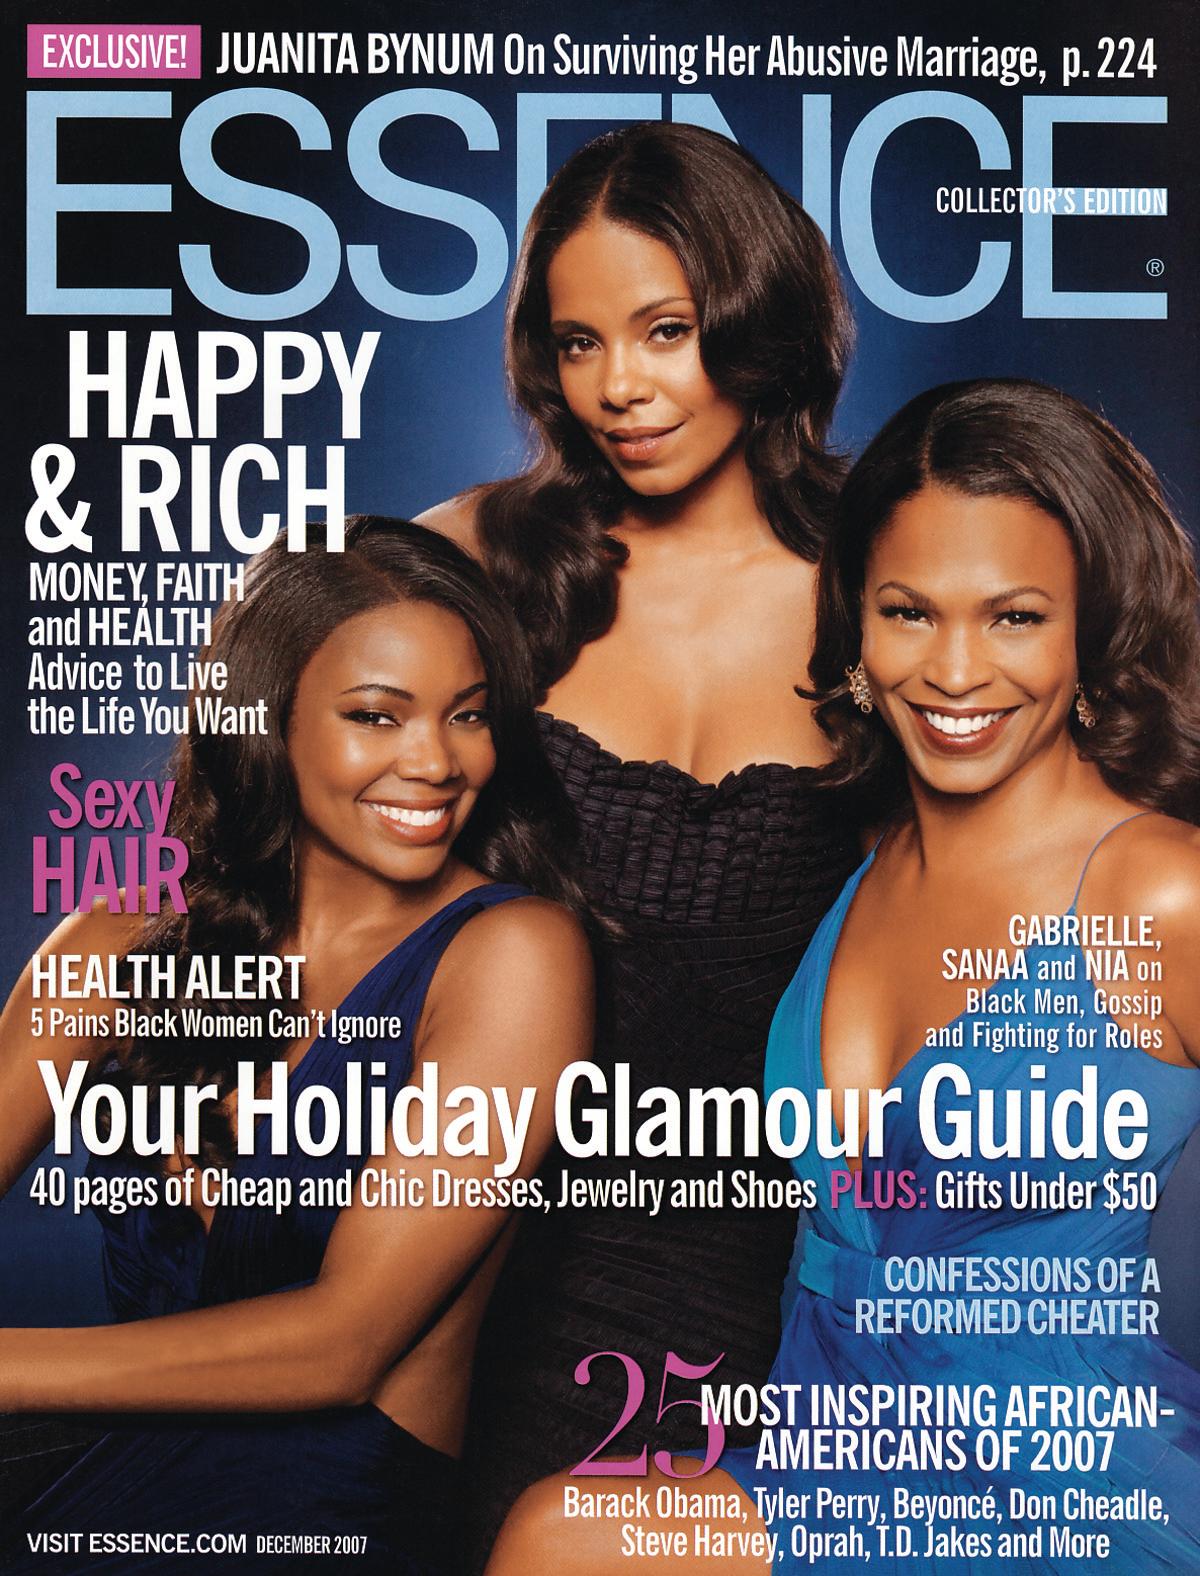 A Look At Nia Long's Head-Turning ESSENCE Covers Marking Her Three Decades In Hollywood